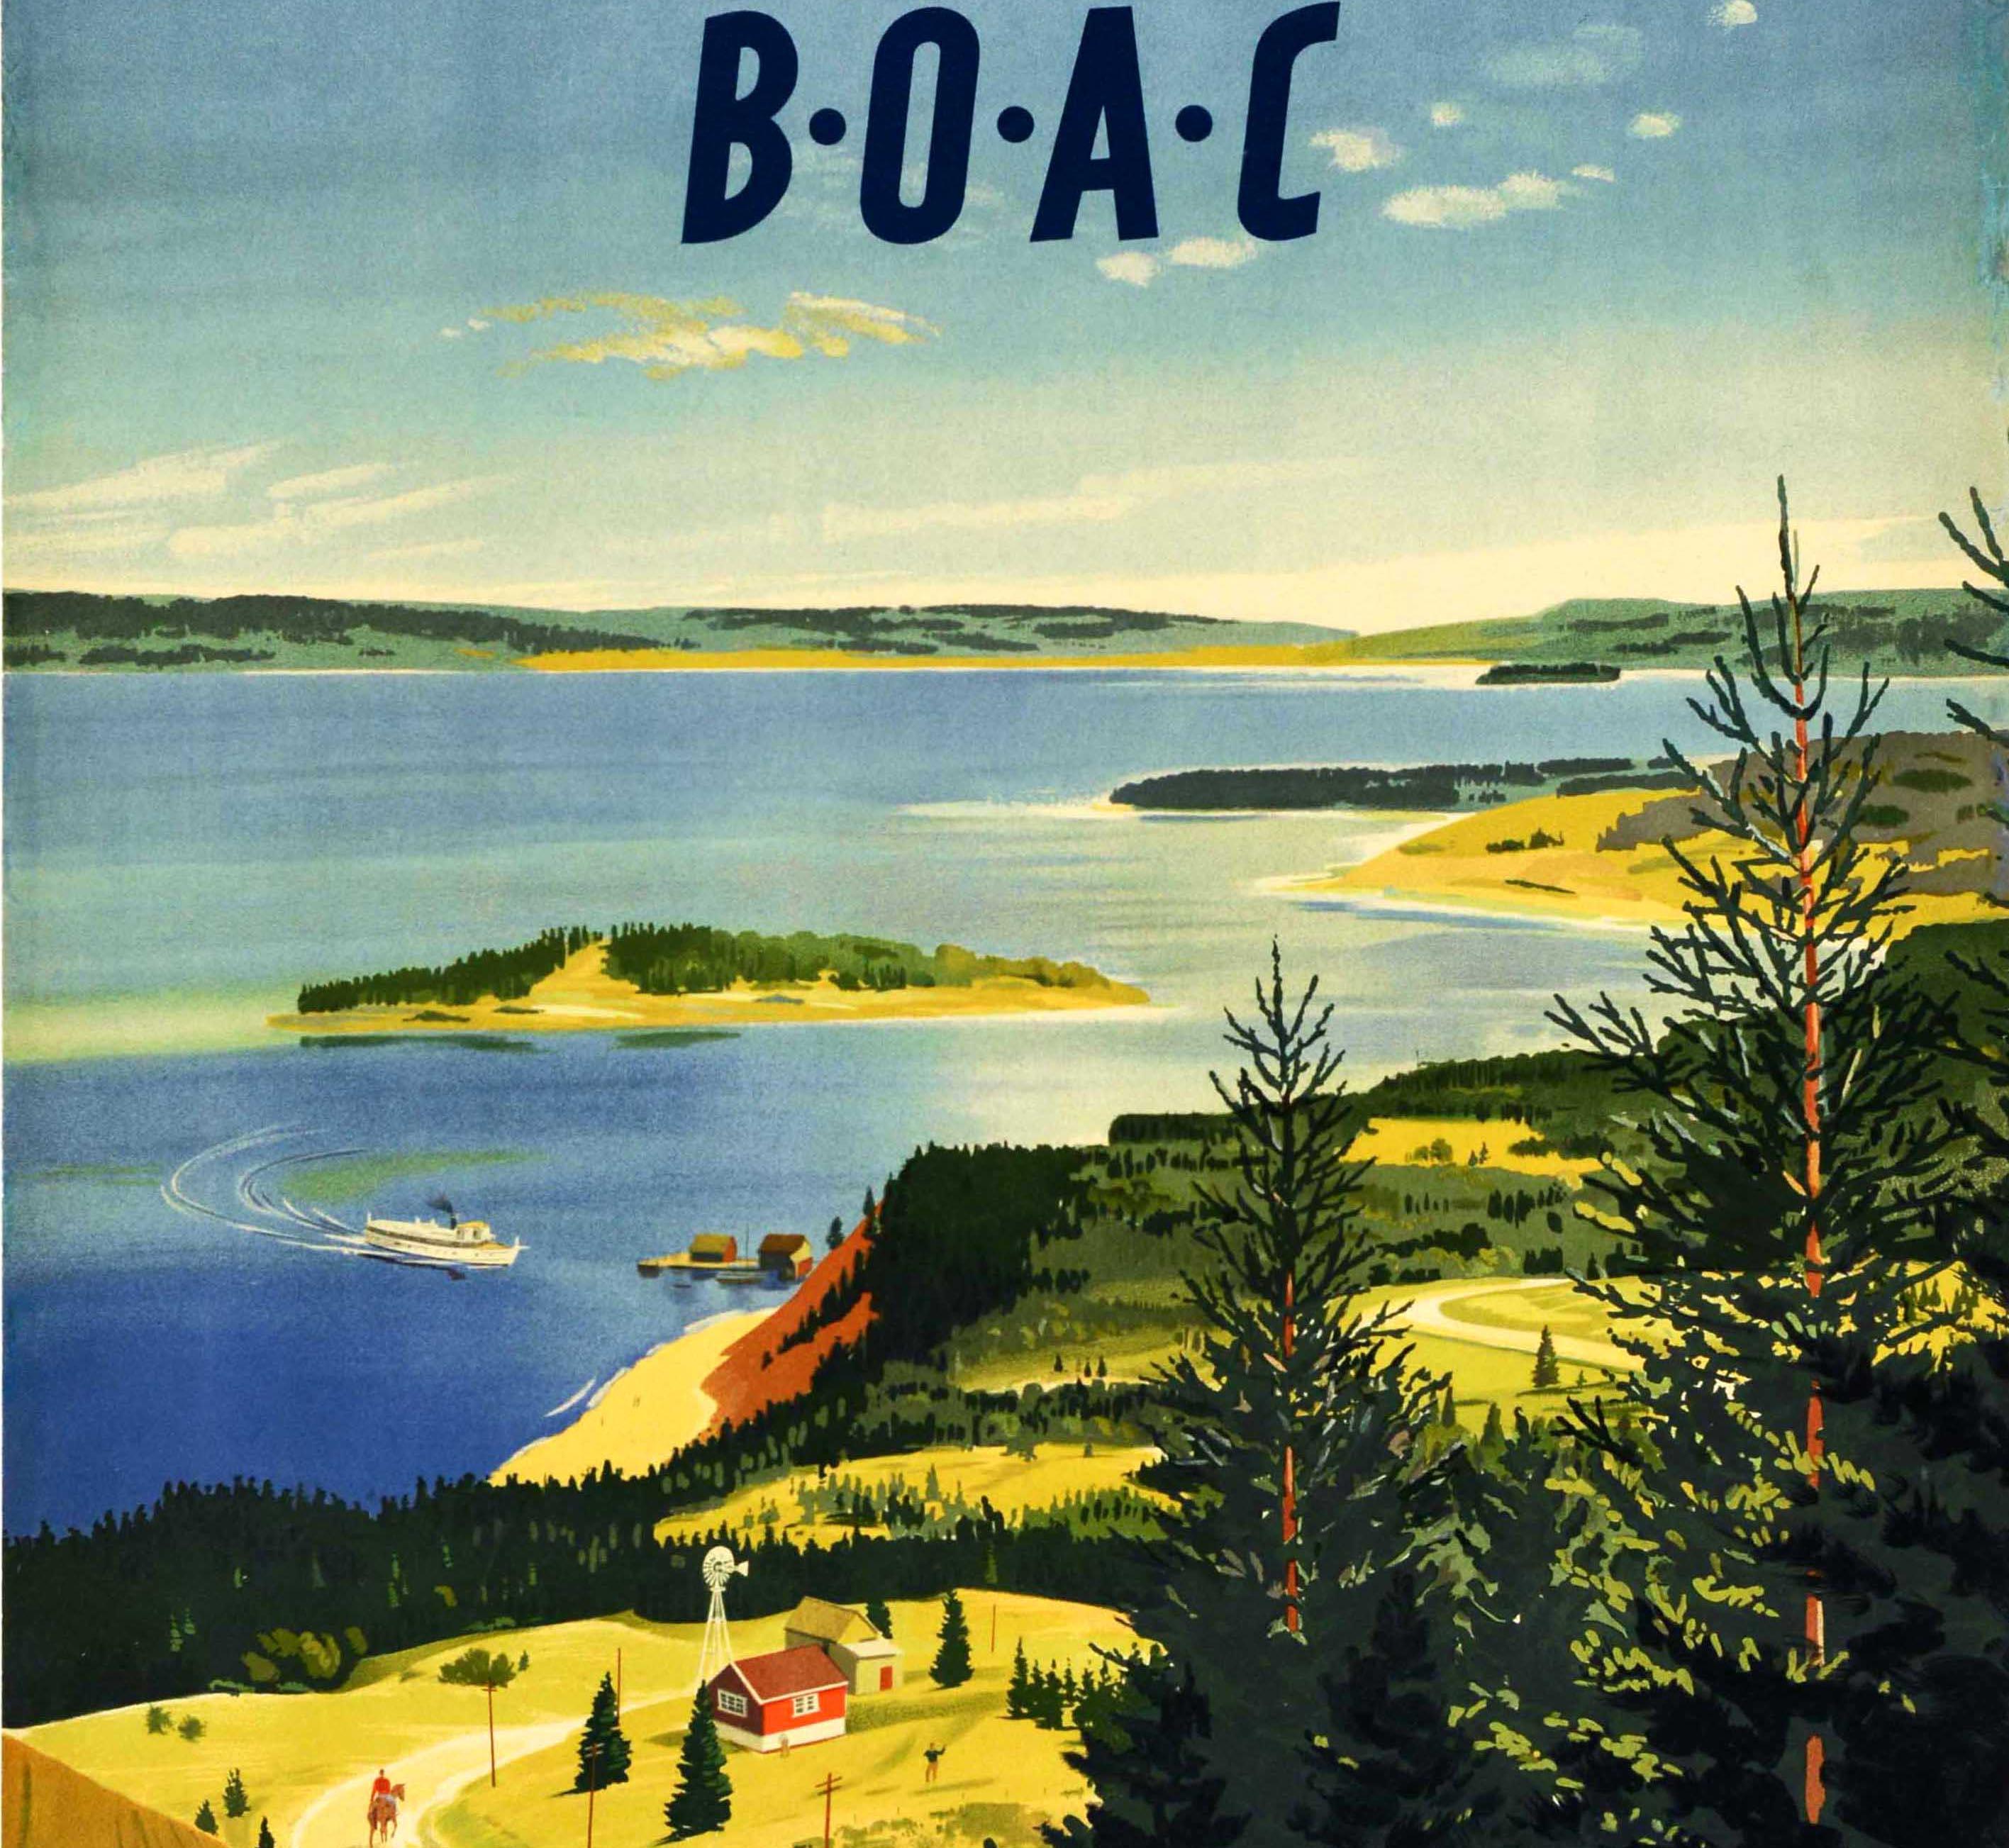 Original vintage travel poster - Fly to Canada by BOAC - featuring scenic artwork by Paul Chater (1879-1949) depicting a boat on calm blue water with an island and hills on the horizon, a sandy beach and cliff by the jetty with people walking and a